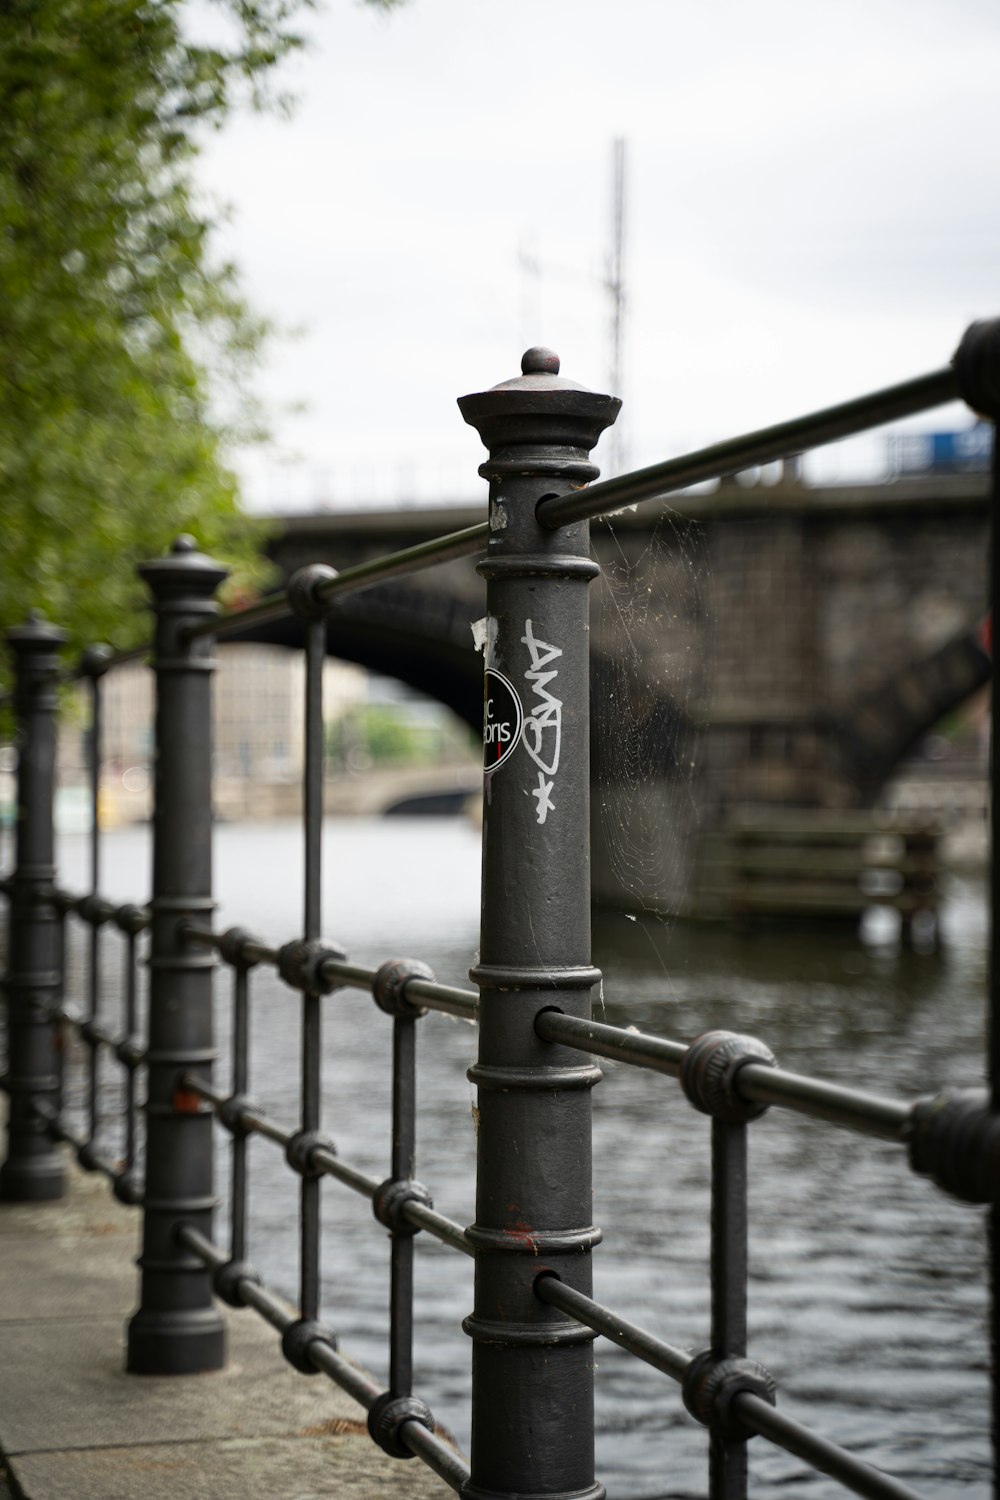 a black fence with graffiti on it next to a body of water